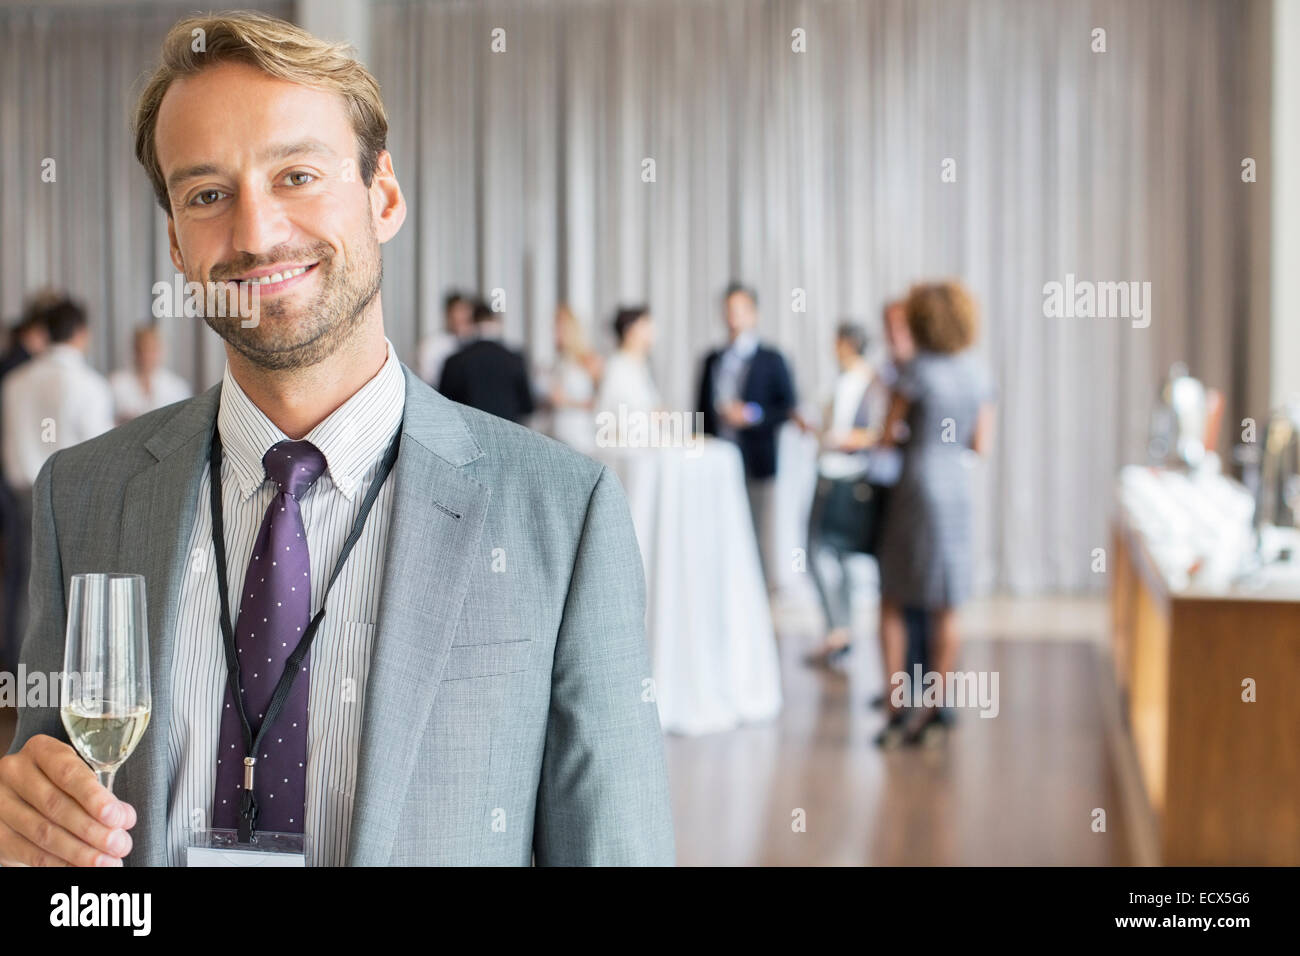 Portrait of smiling businessman holding champagne flute Stock Photo